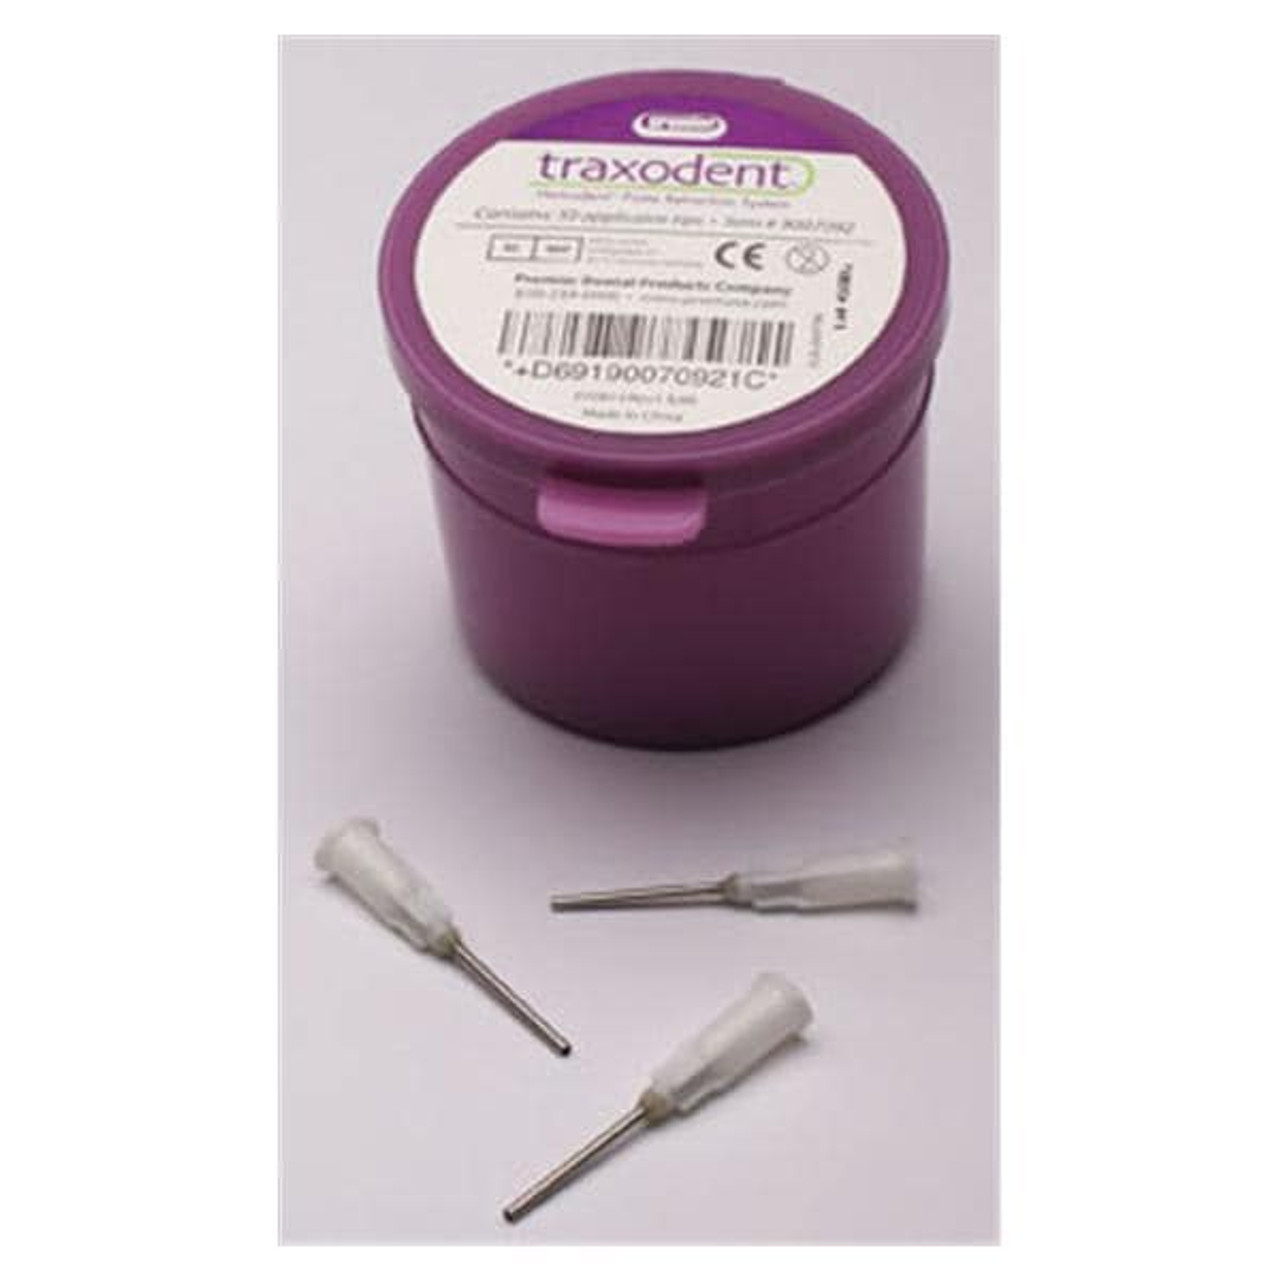 Traxodent 9007092 Applicator Tip